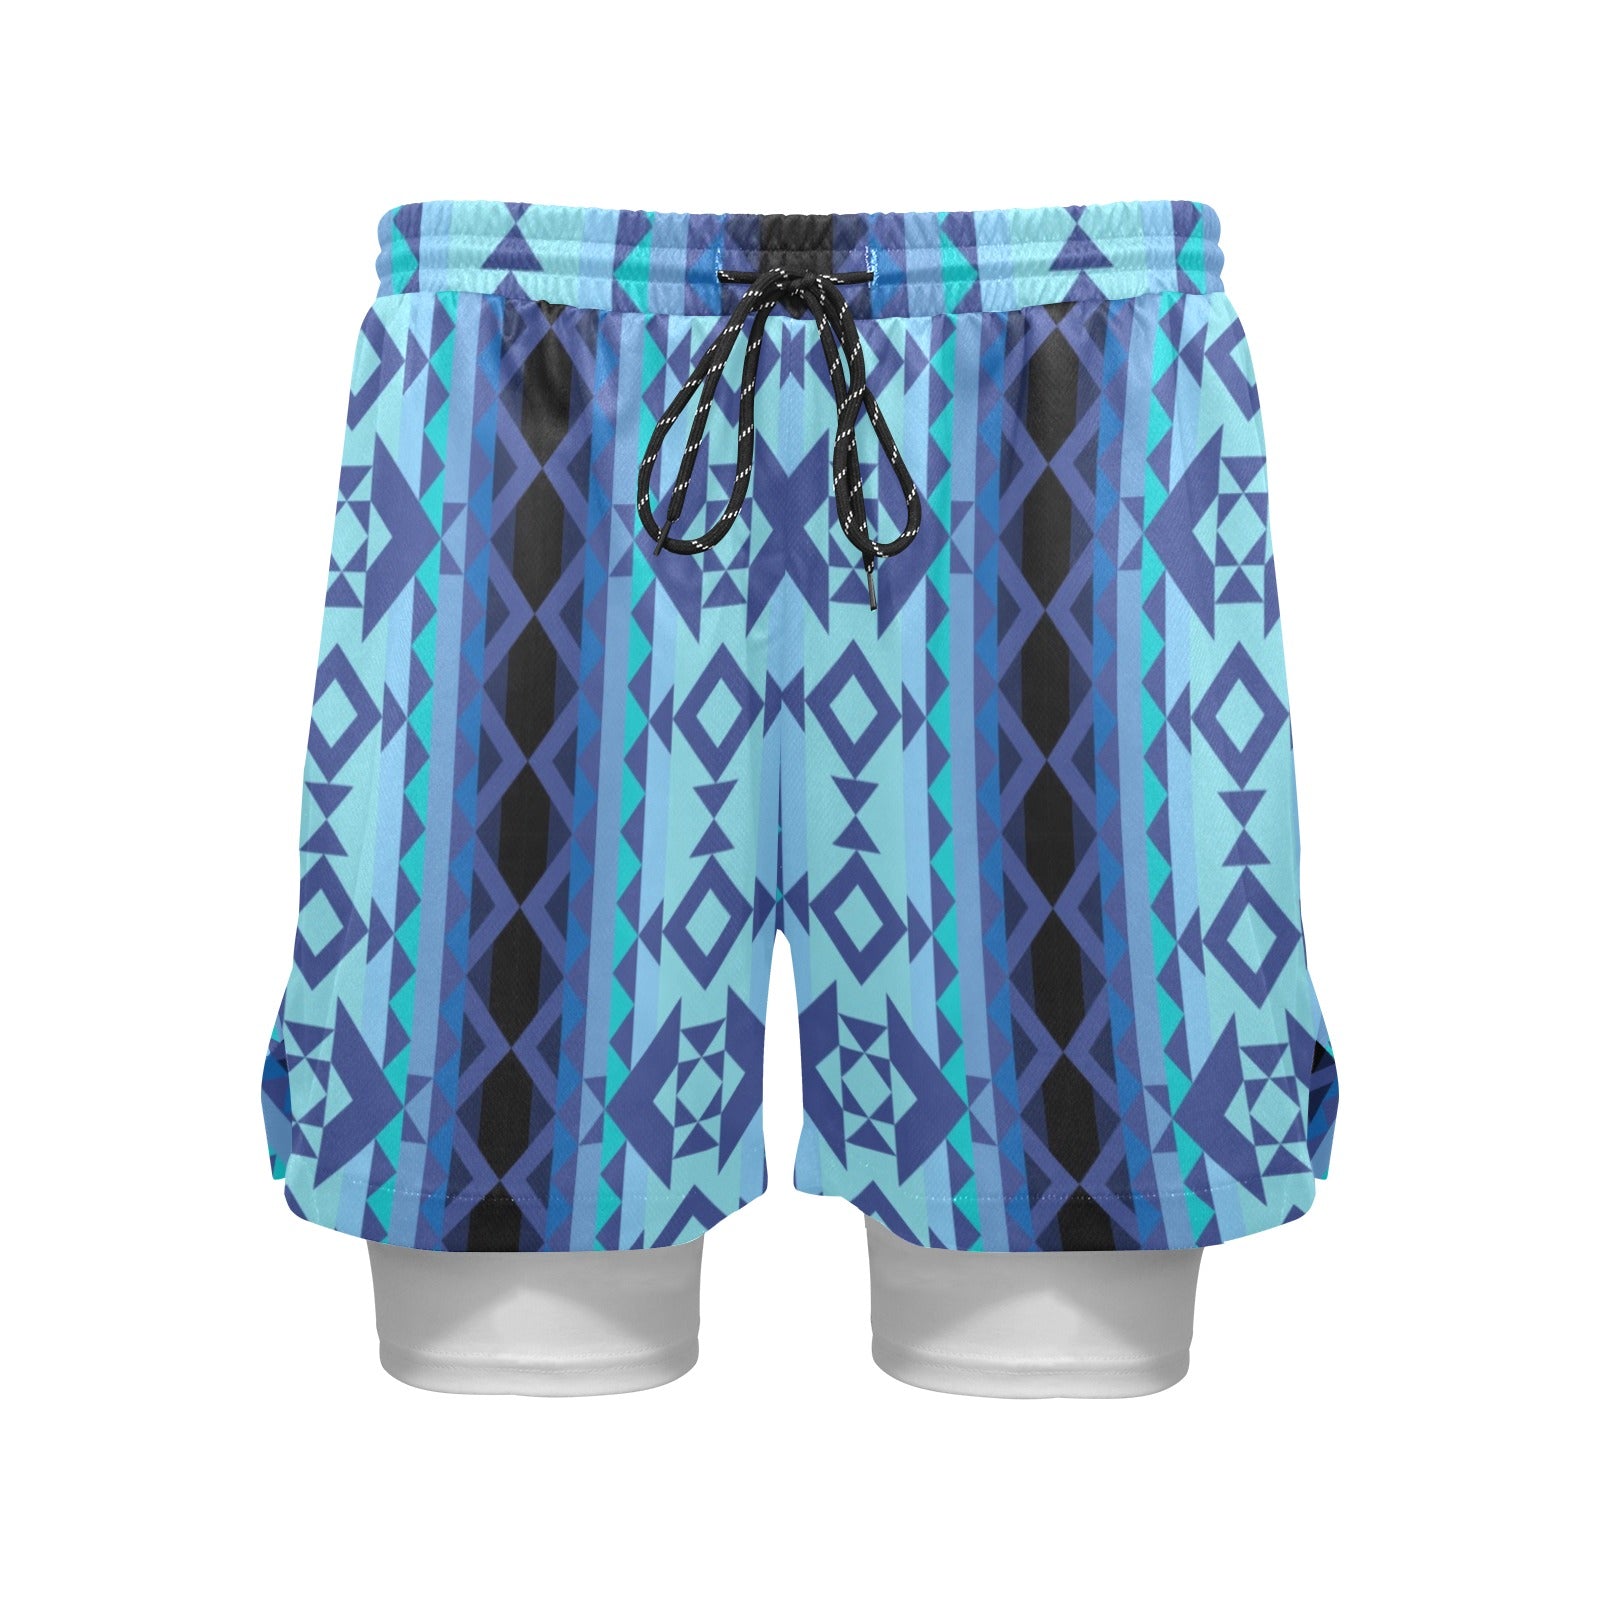 Tipi Men's Sports Shorts with Compression Liner